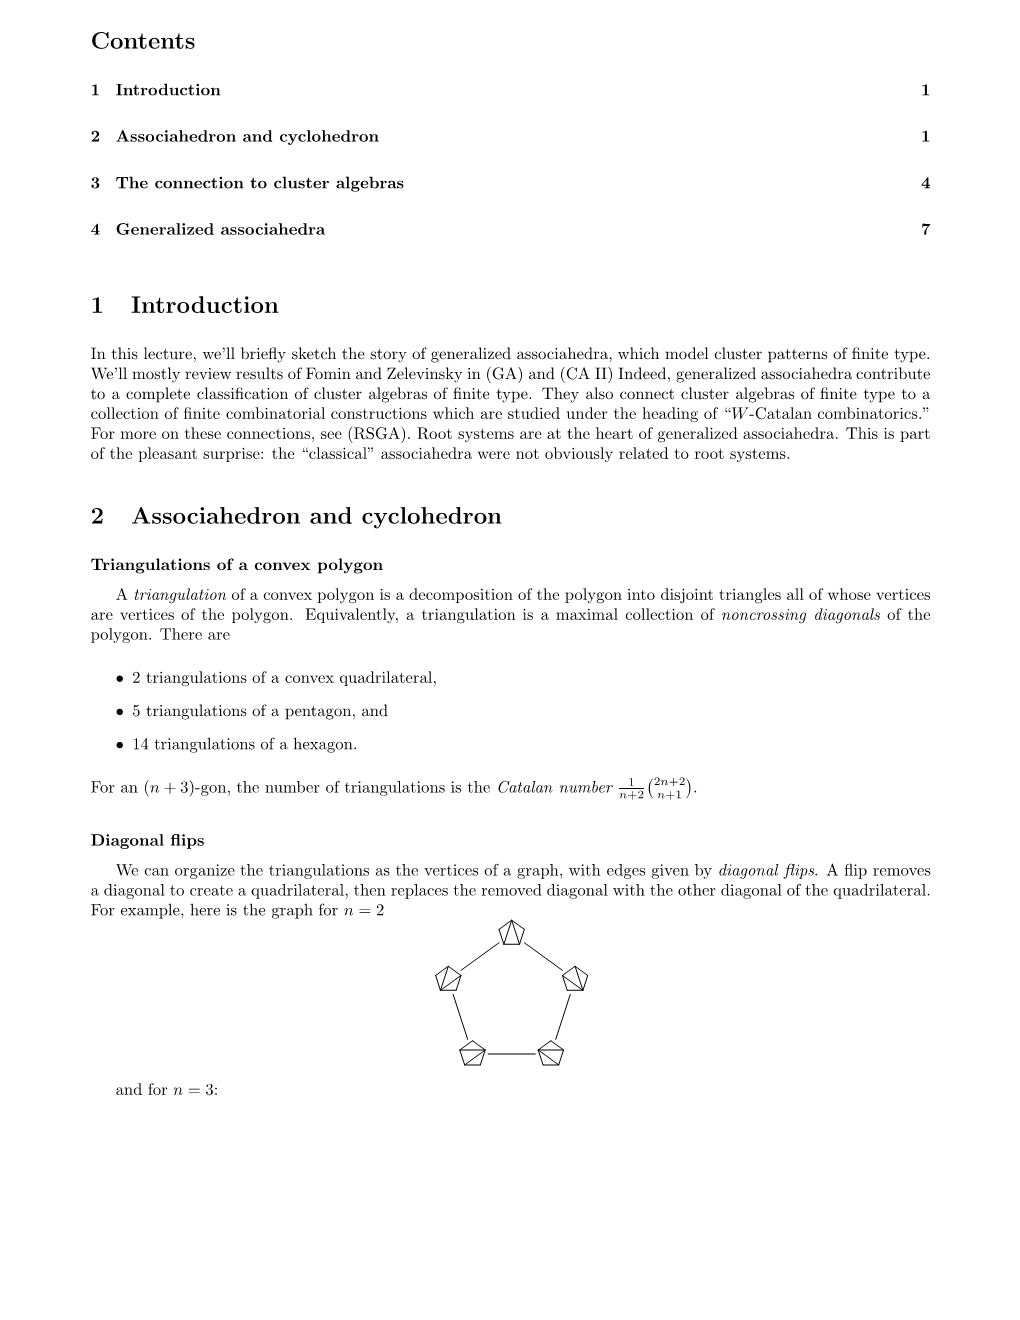 Contents 1 Introduction 2 Associahedron and Cyclohedron